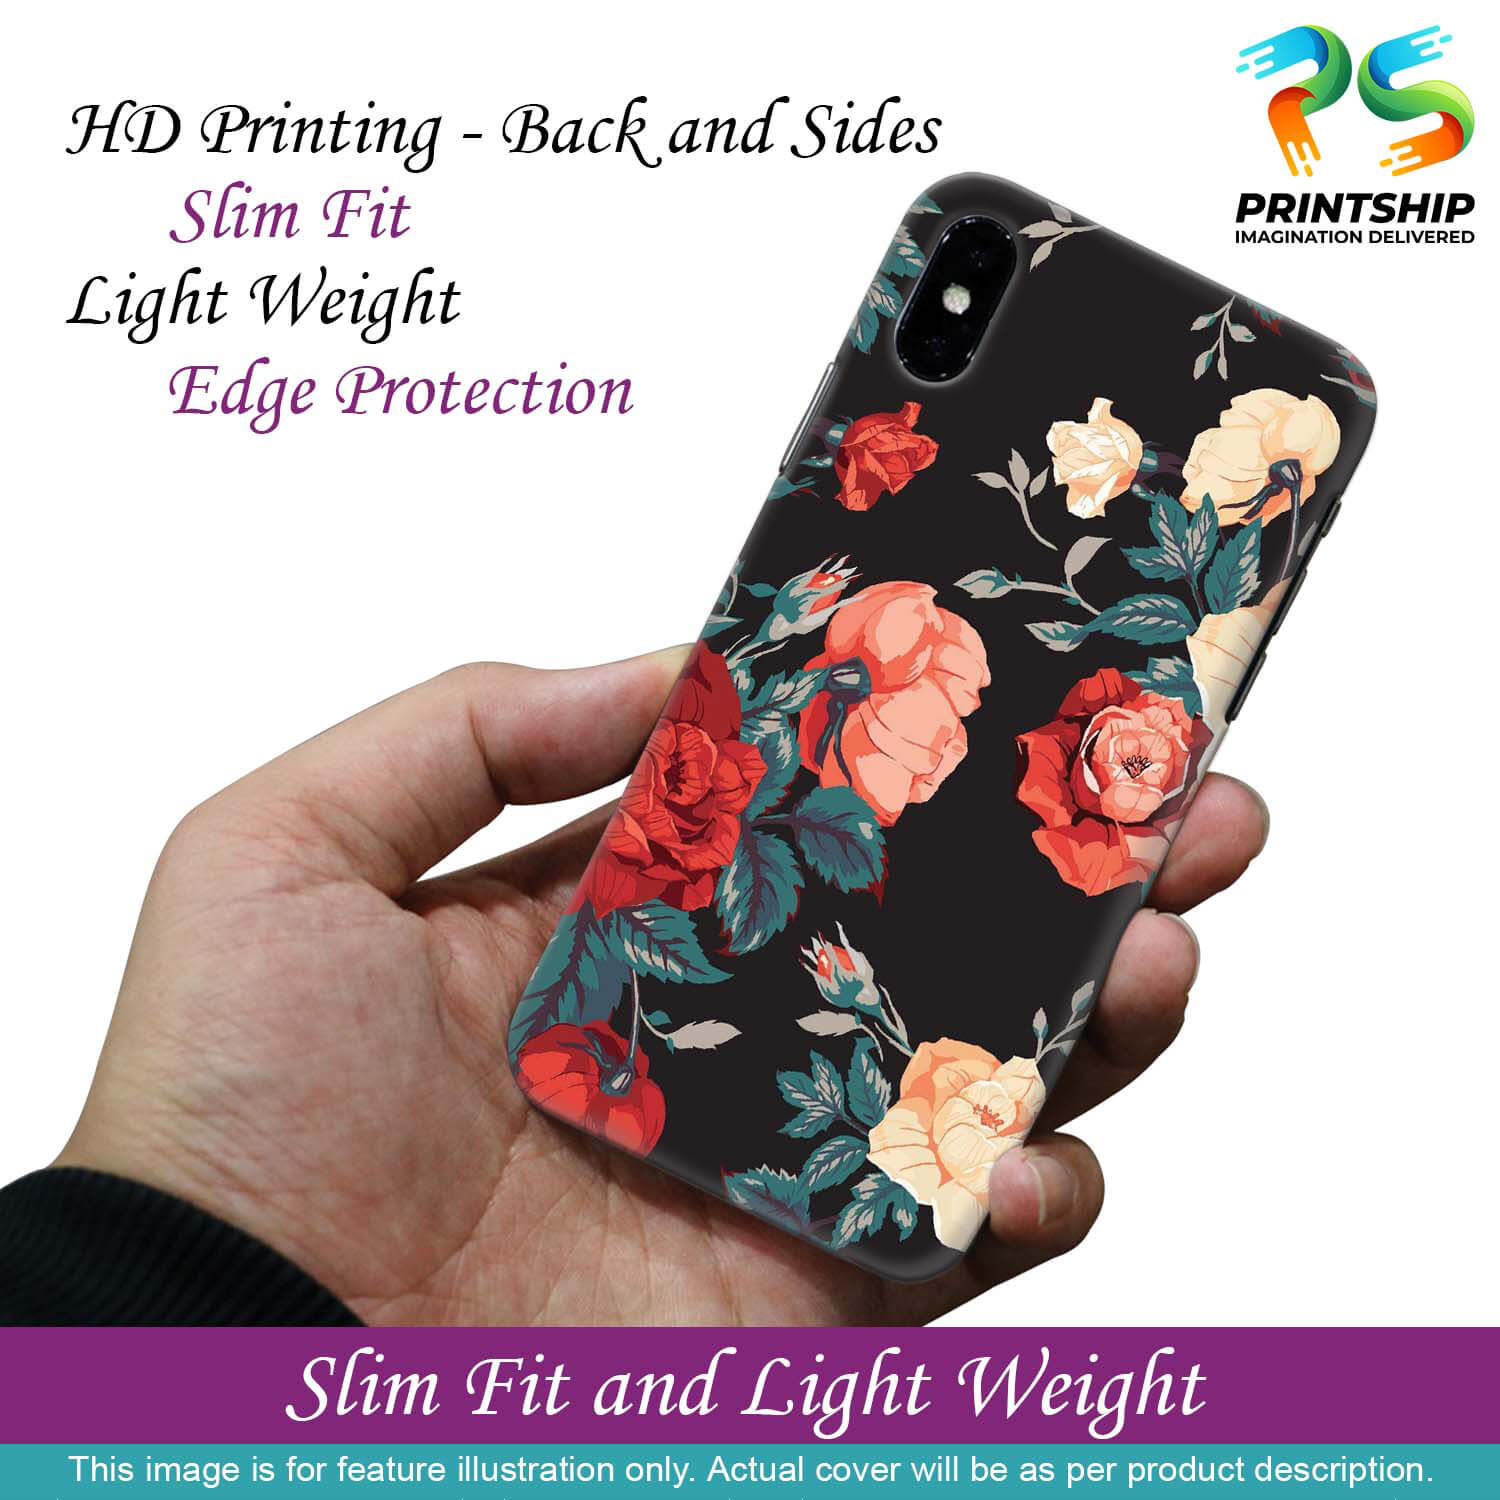 PS1340-Premium Flowers Back Cover for vivo Y1s